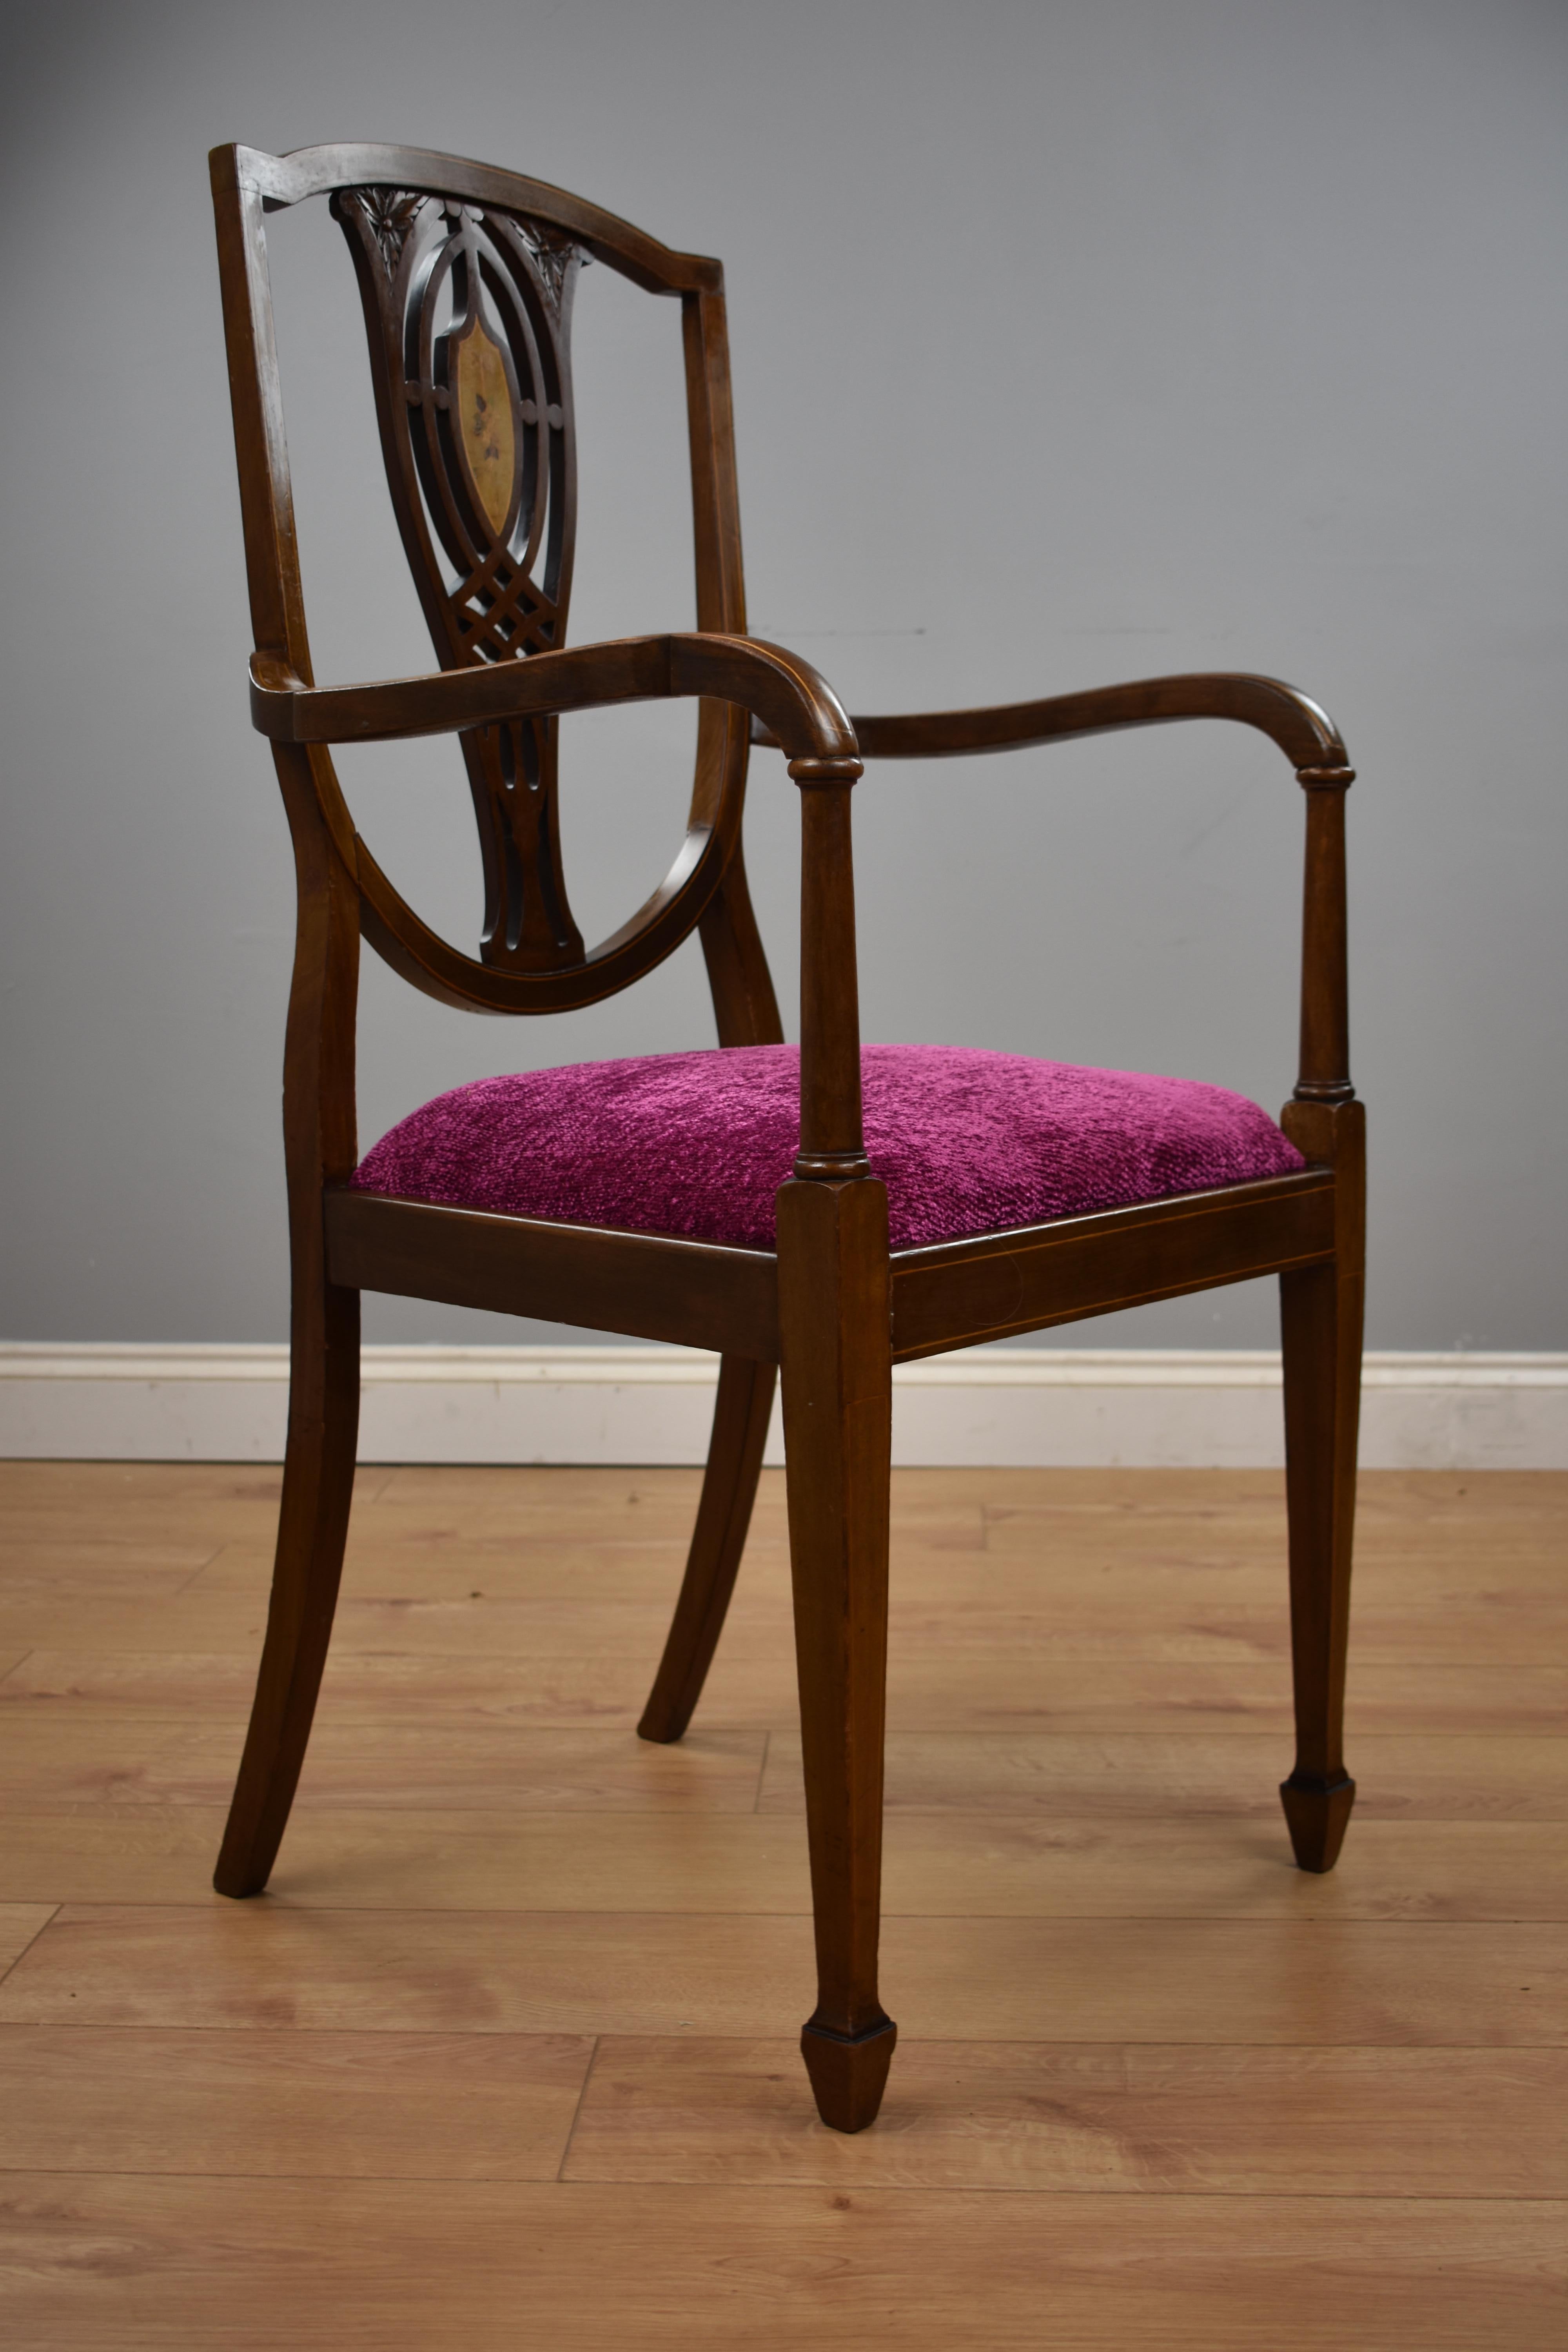 Edwardian inlaid mahogany chair in good condition, the chair has a nice floral inlay to the back with upholstered drop in seat standing on tapered legs.